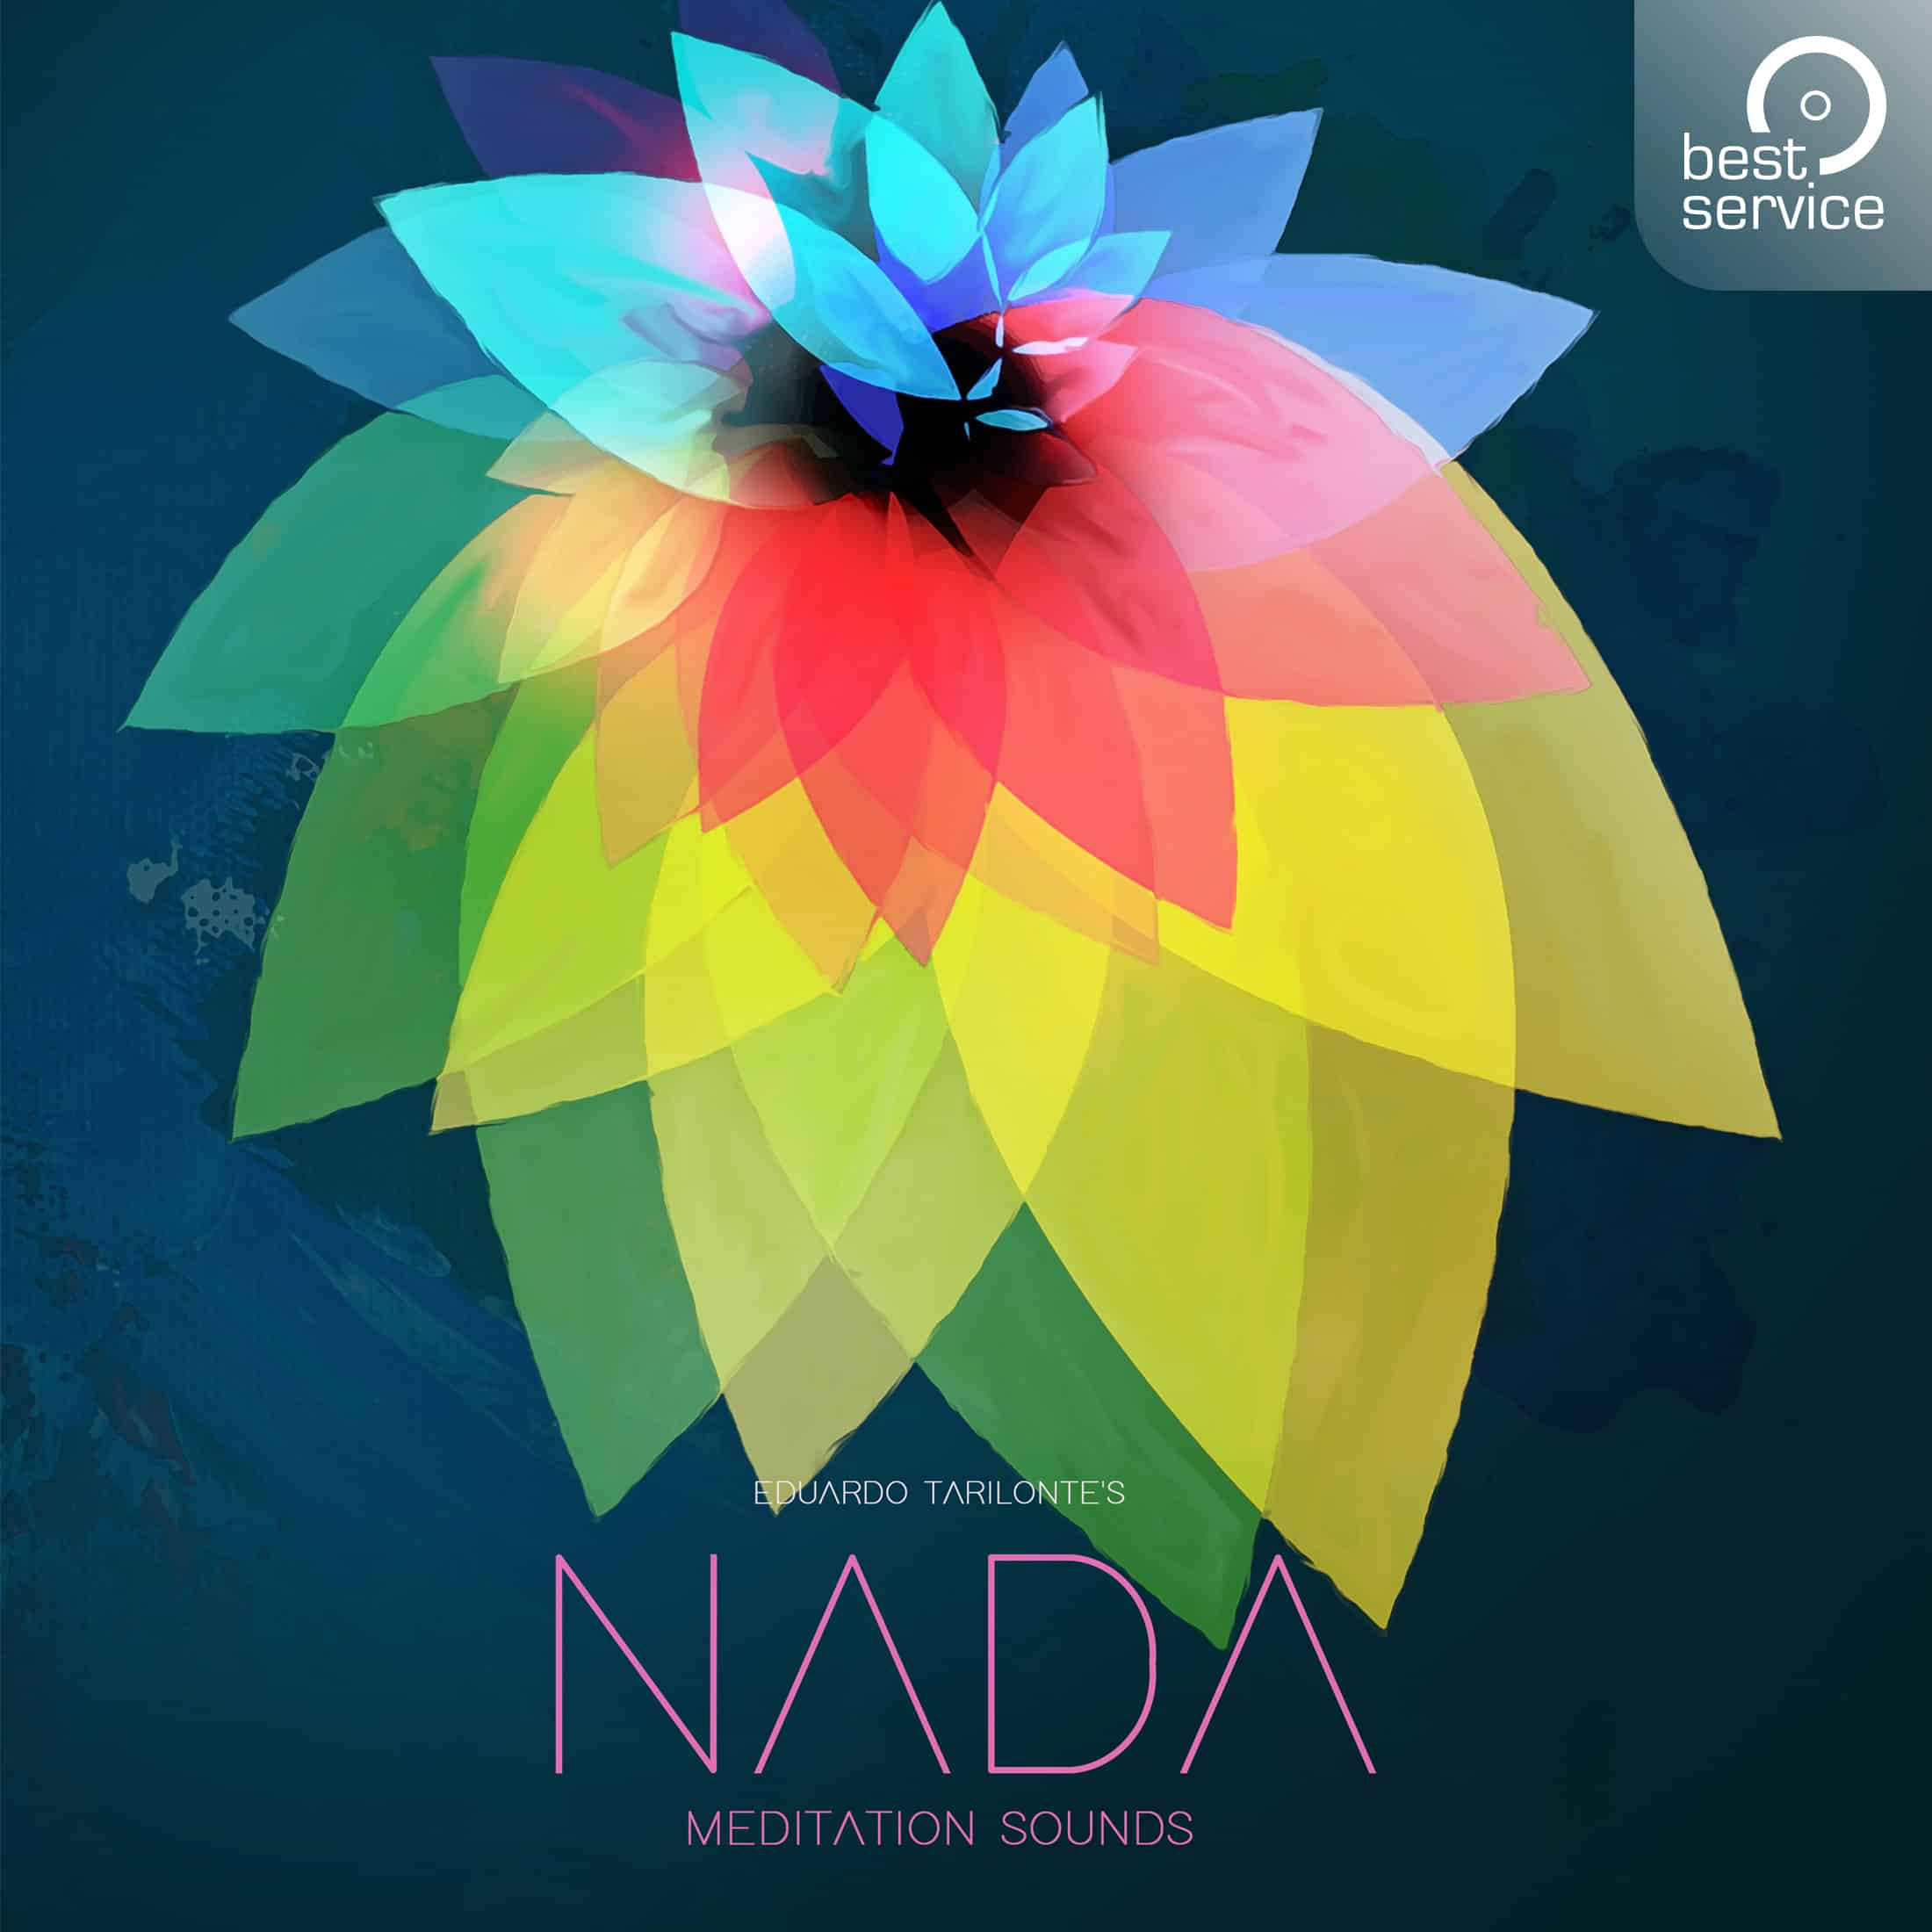 Review of NADA, Meditation & New Age Sounds by Eduardo Tarilonte & Best Service